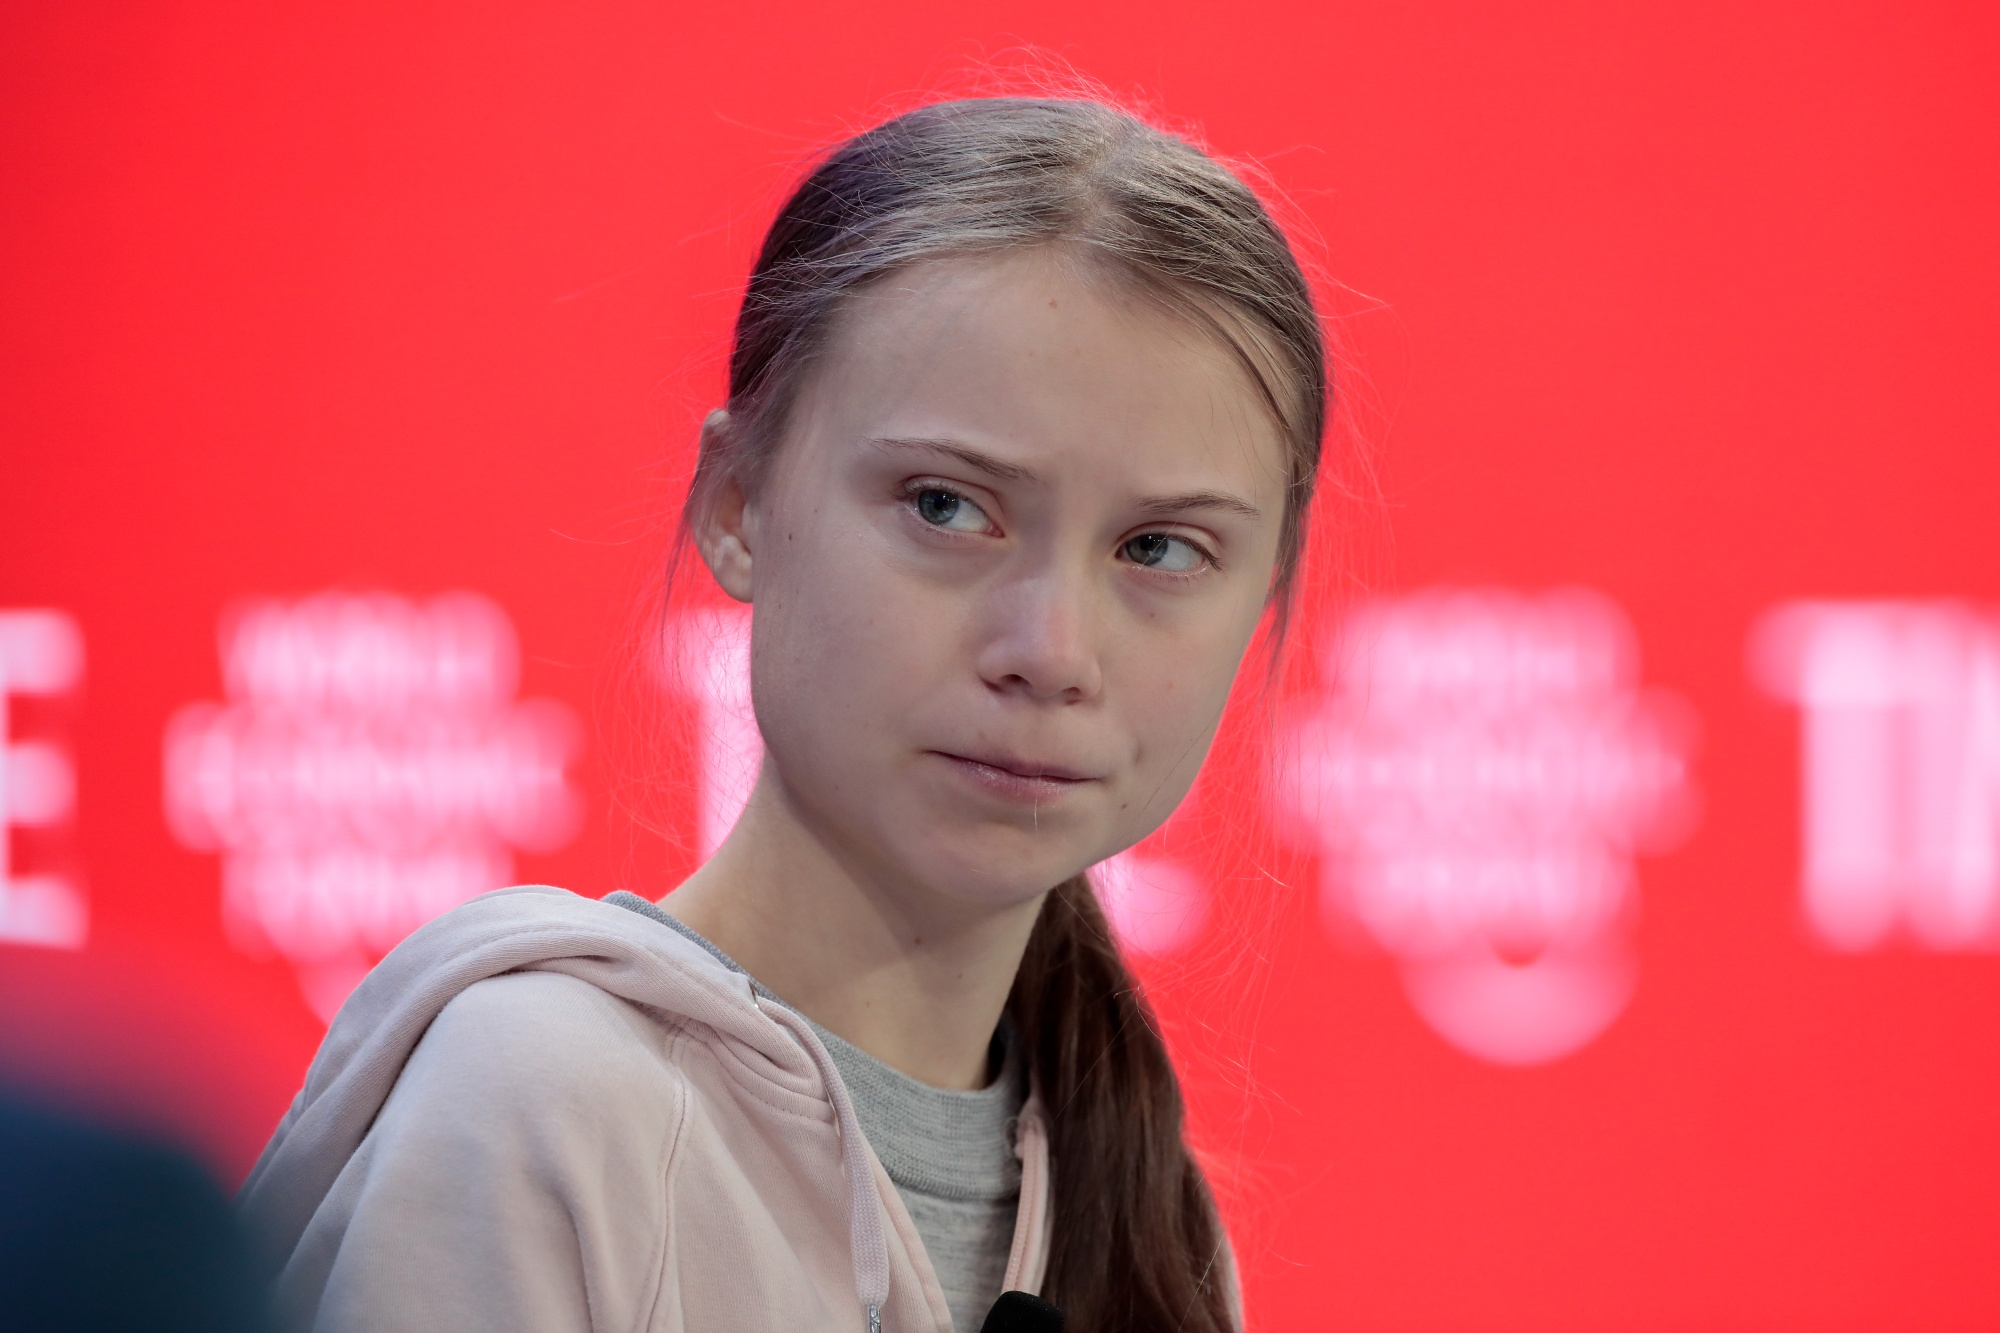 Greta Thunberg attends a panel session in Davos on Jan. 21.